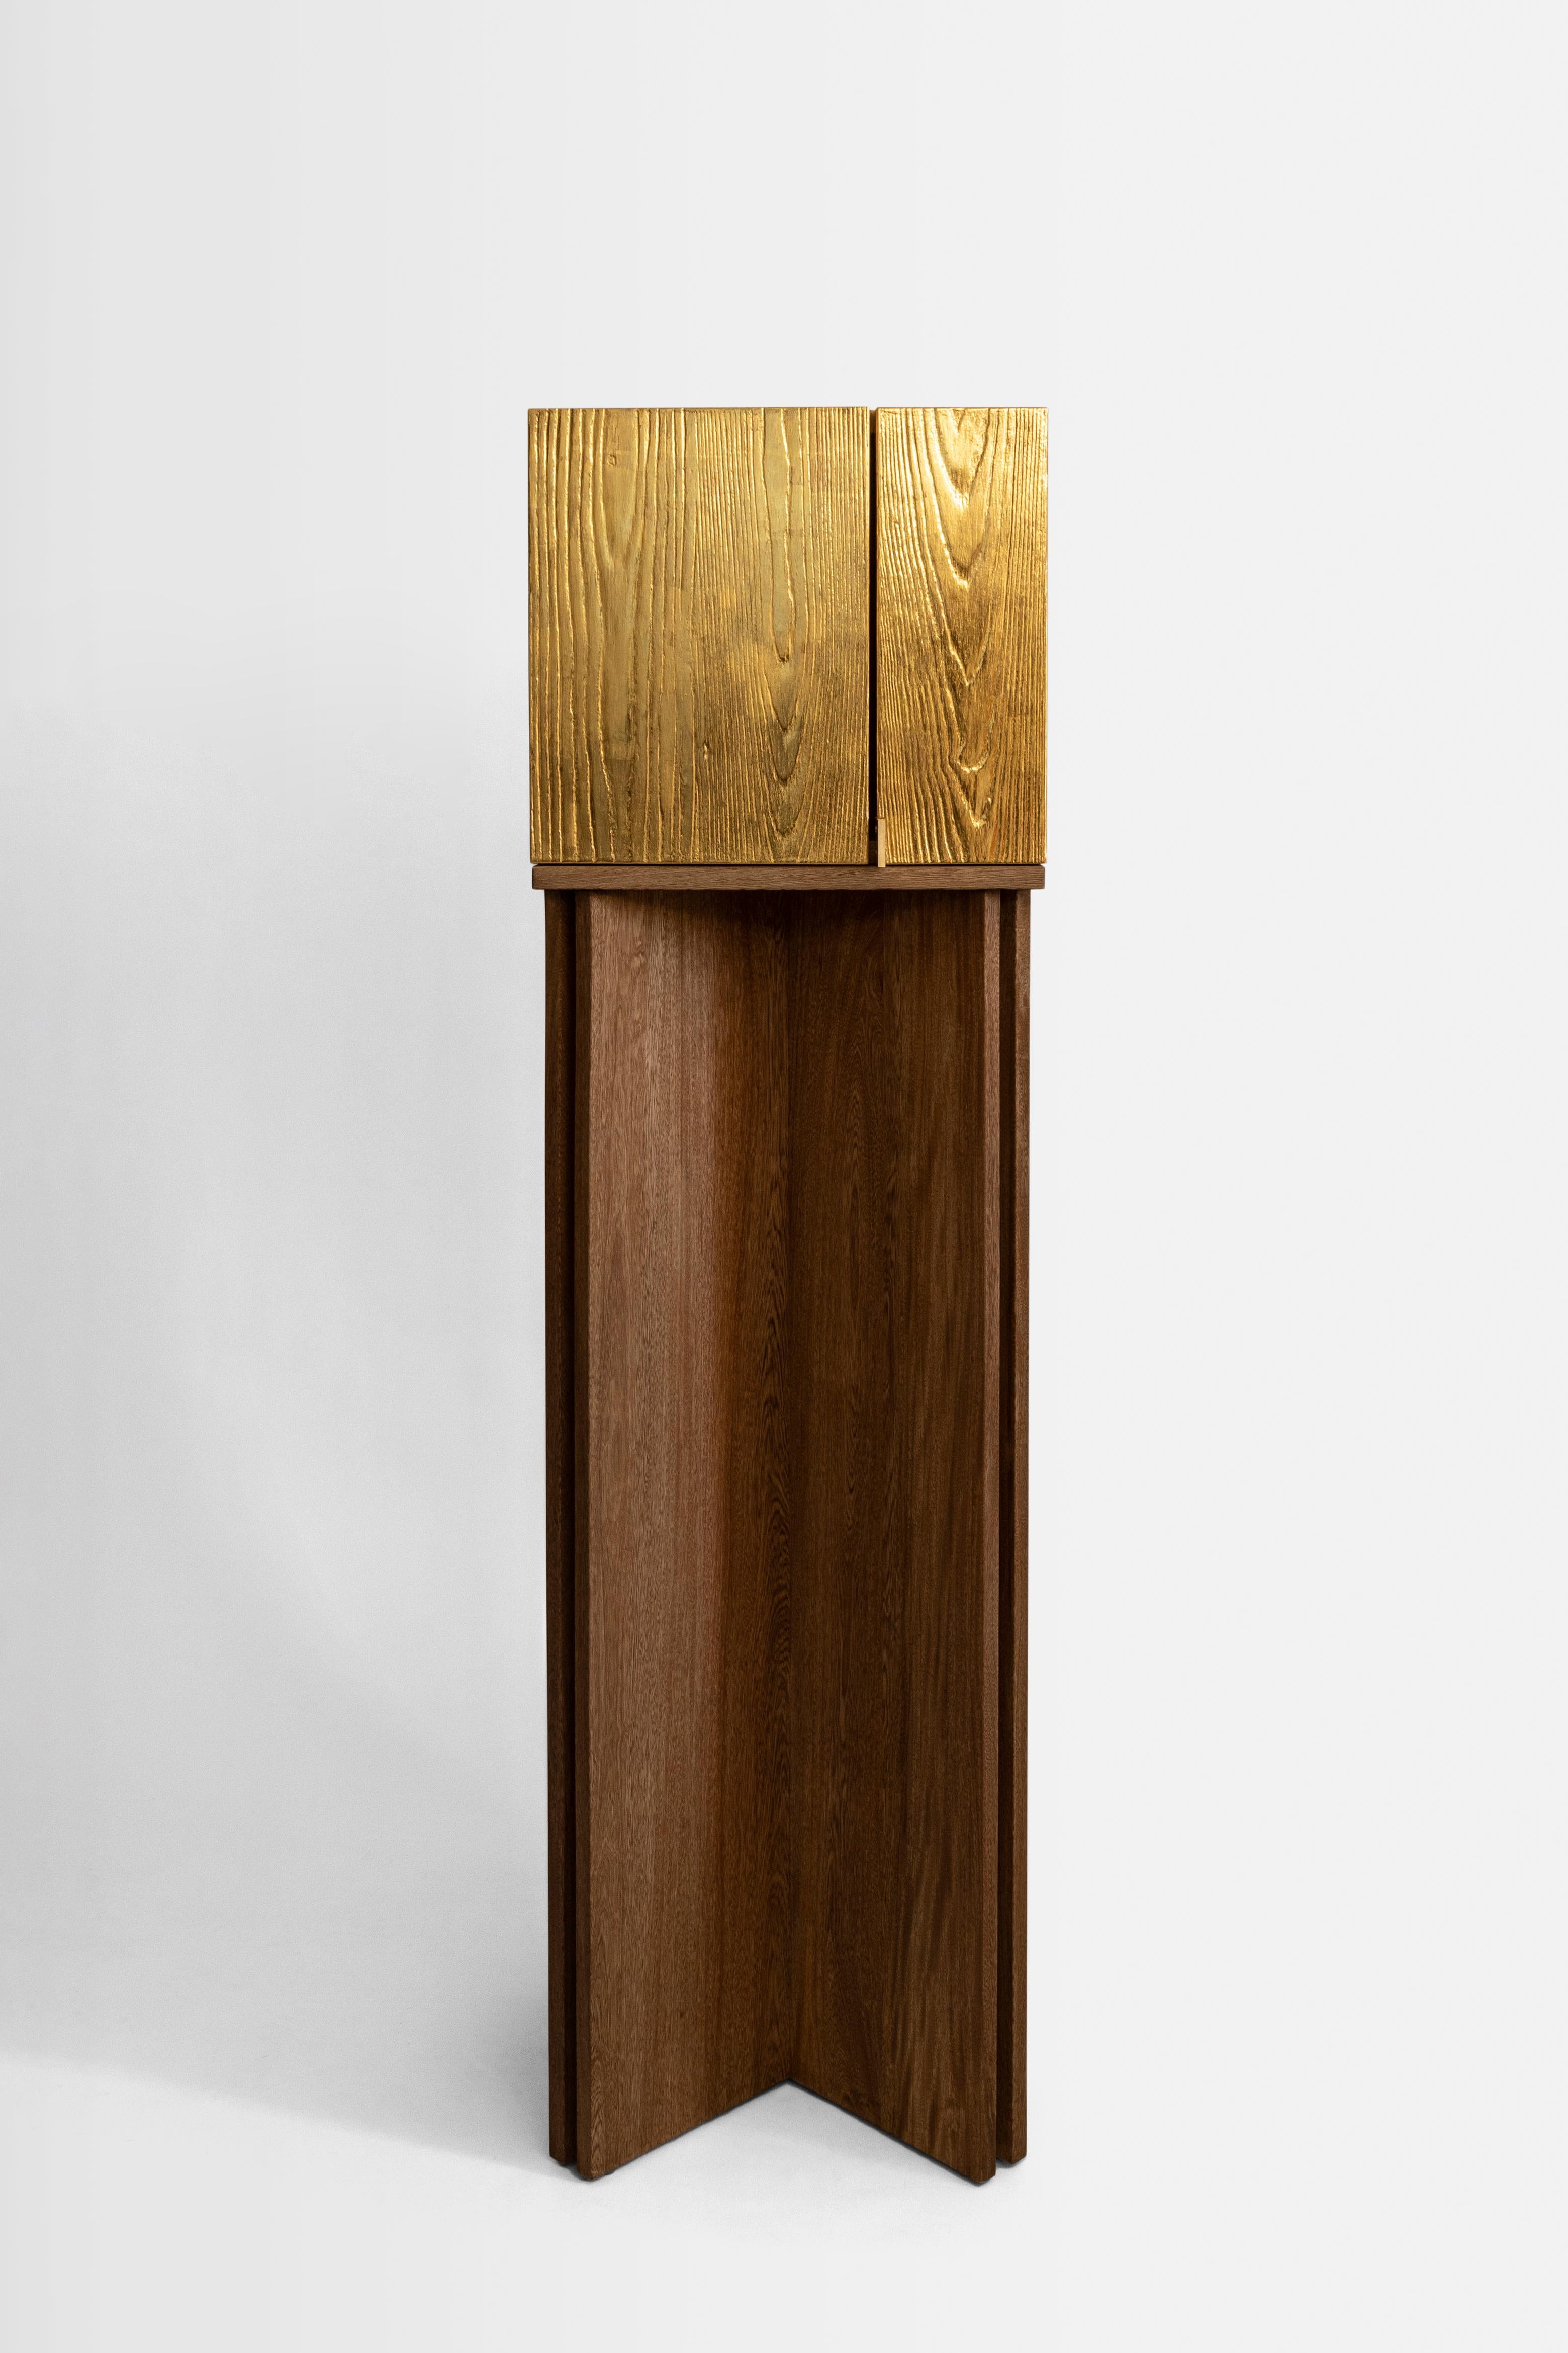 Architects Karla Vázquez from KV and Caterina Moretti from Peca collaborated to create The Aurum Cabinets, which are sculptural works and unique pieces that aim to open honest dialogues about the objects closest to us.

Each piece was meticulously